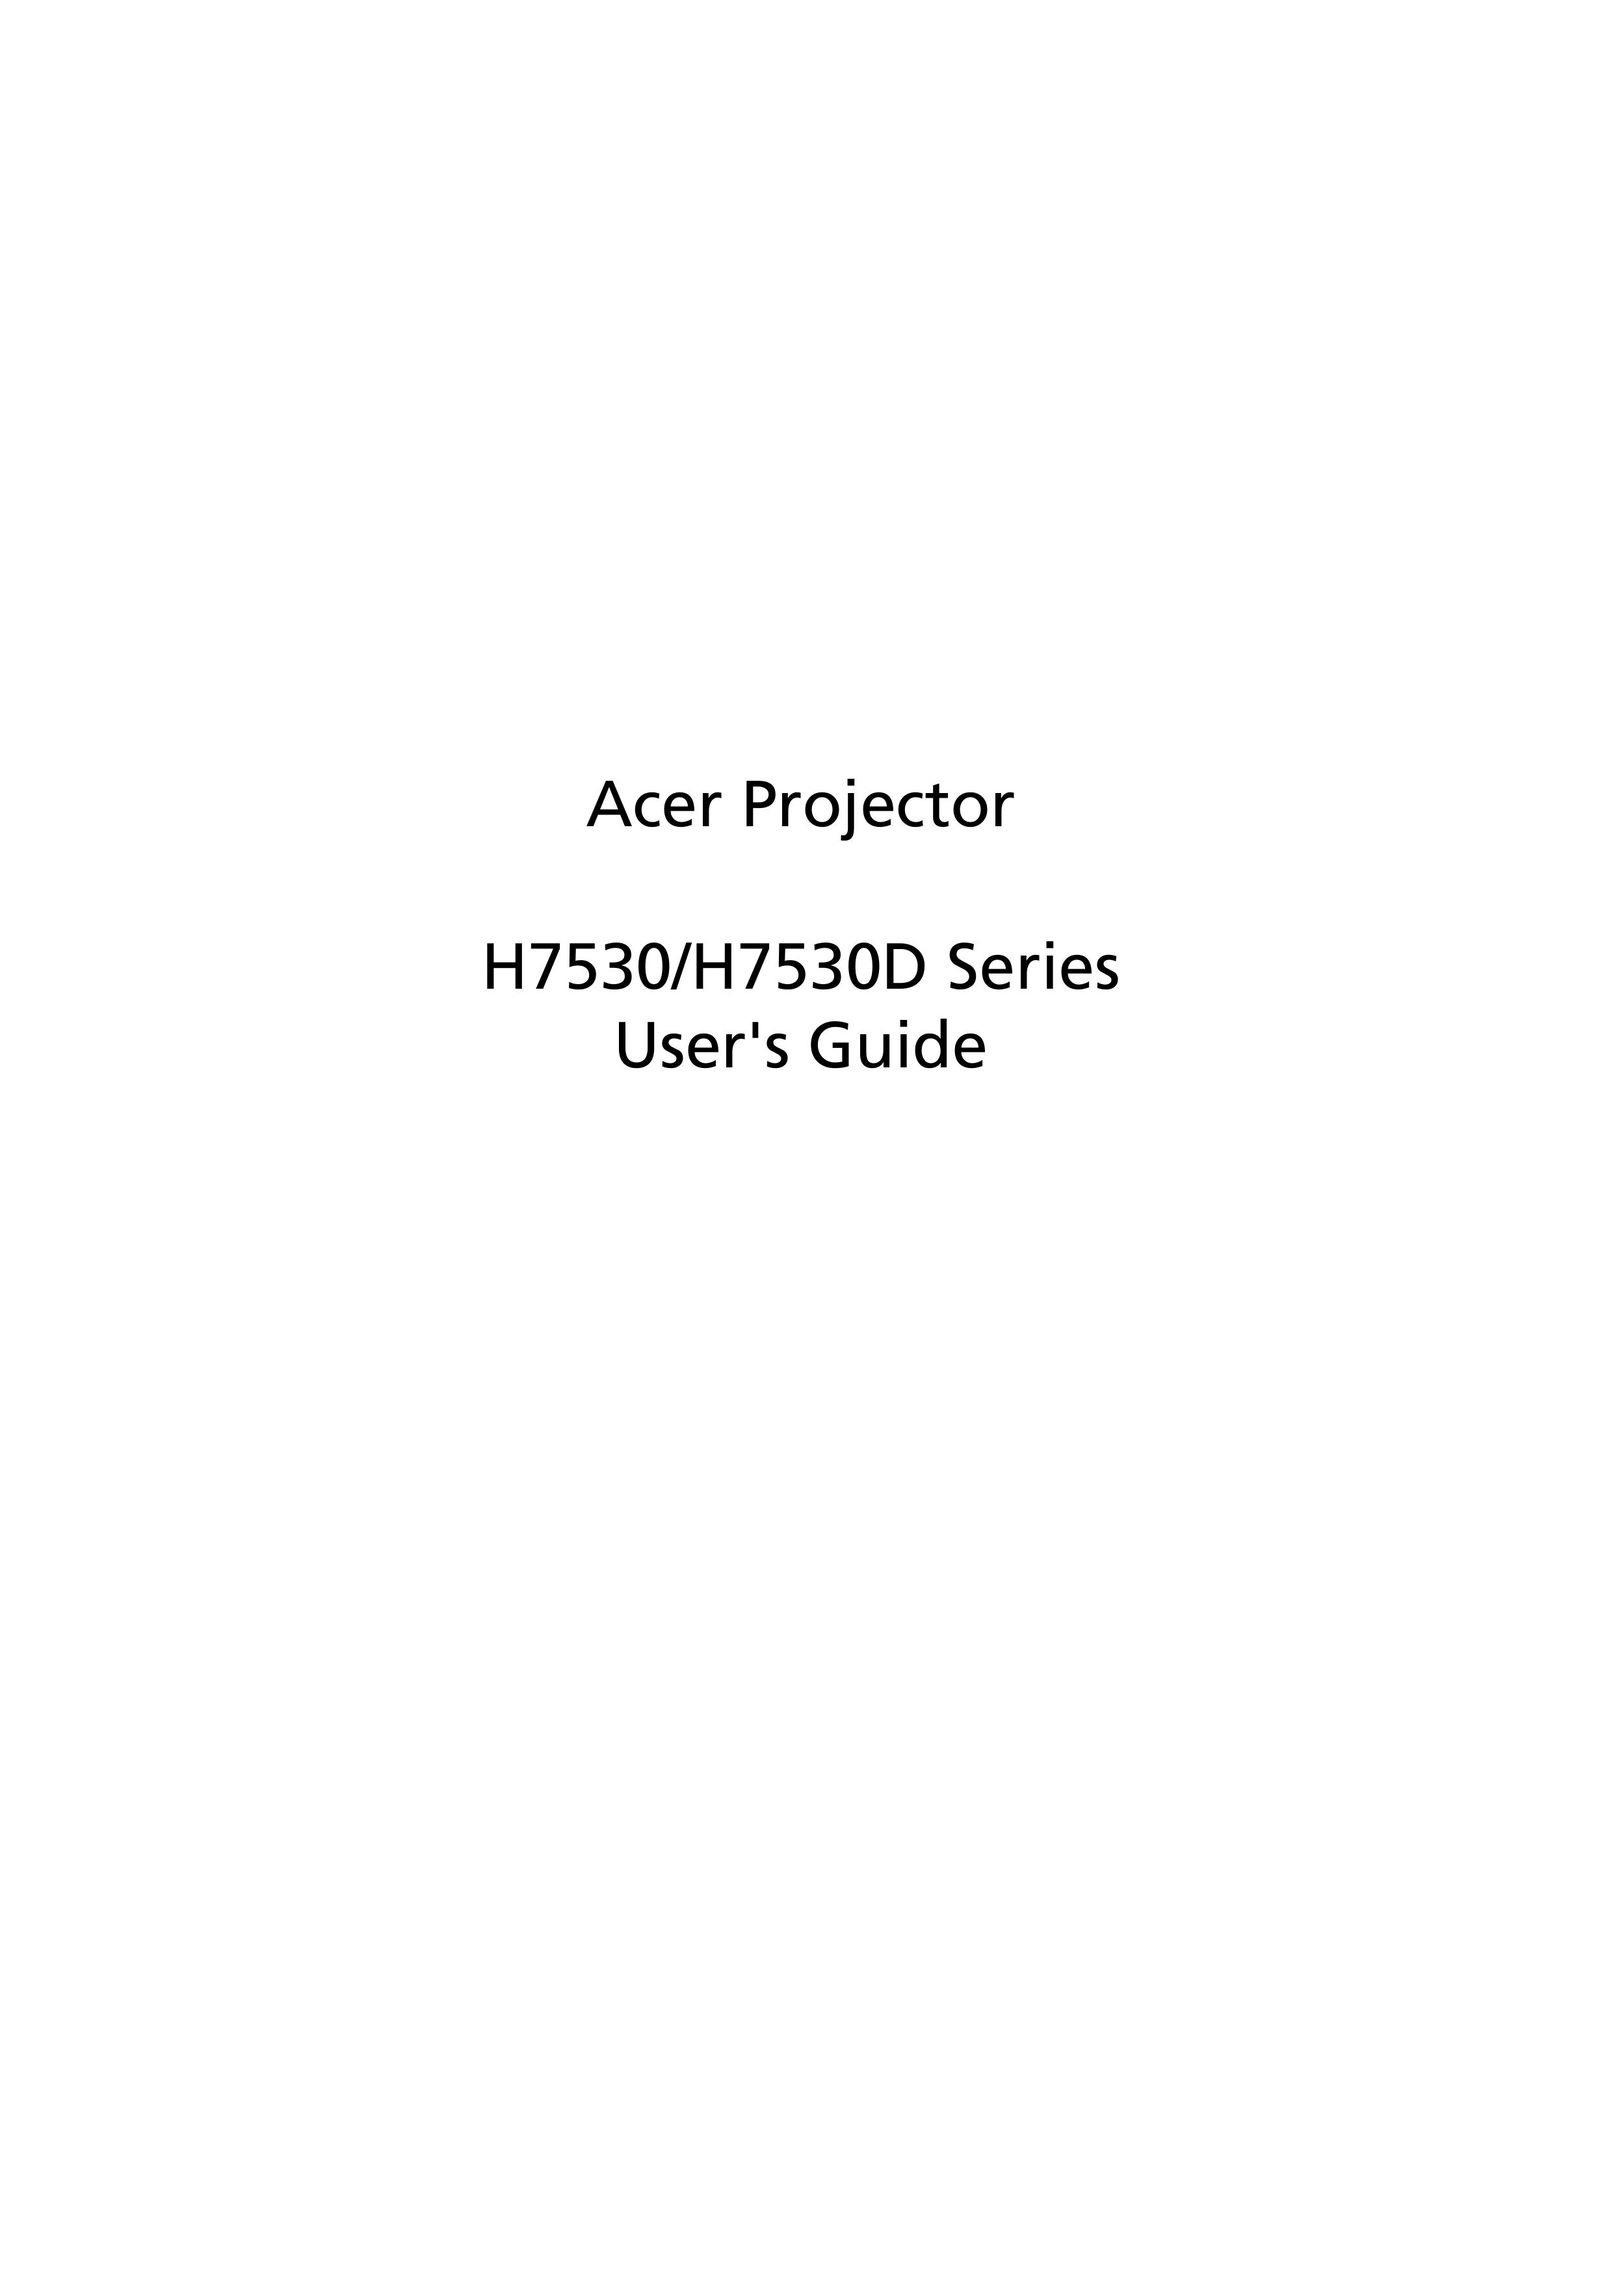 Acer H7530 Series Projector User Manual